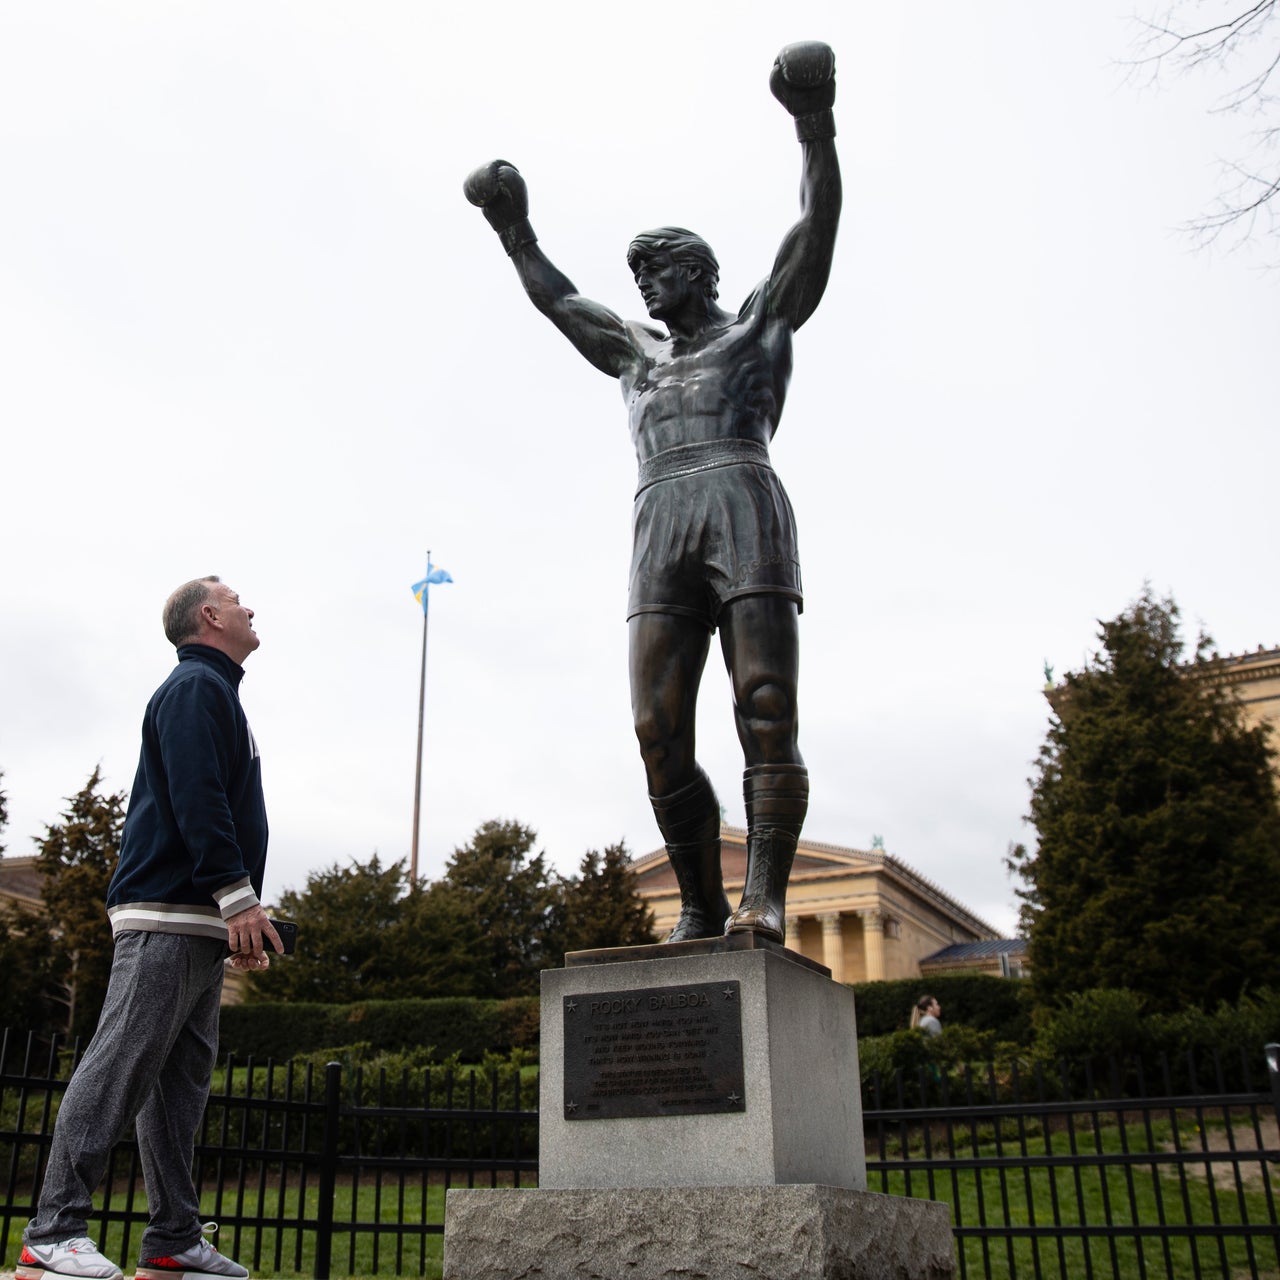 rocky statue with 49ers jersey